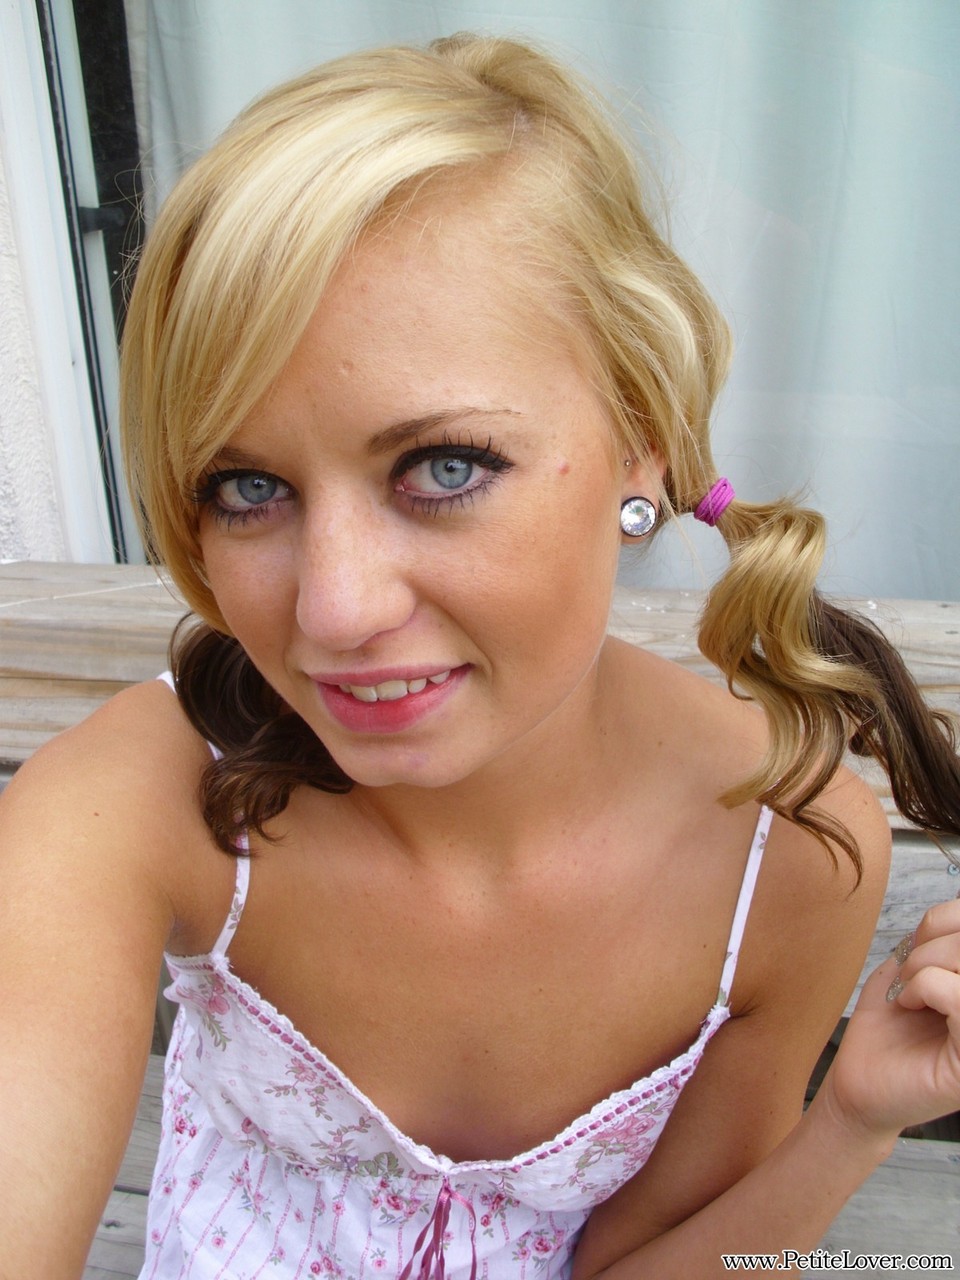 Cute blonde Tiff in pigtails showing off her wee small tits & tiny bald pussy photo porno #428478629 | Petite Lover Pics, Tiff, Amateur, porno mobile